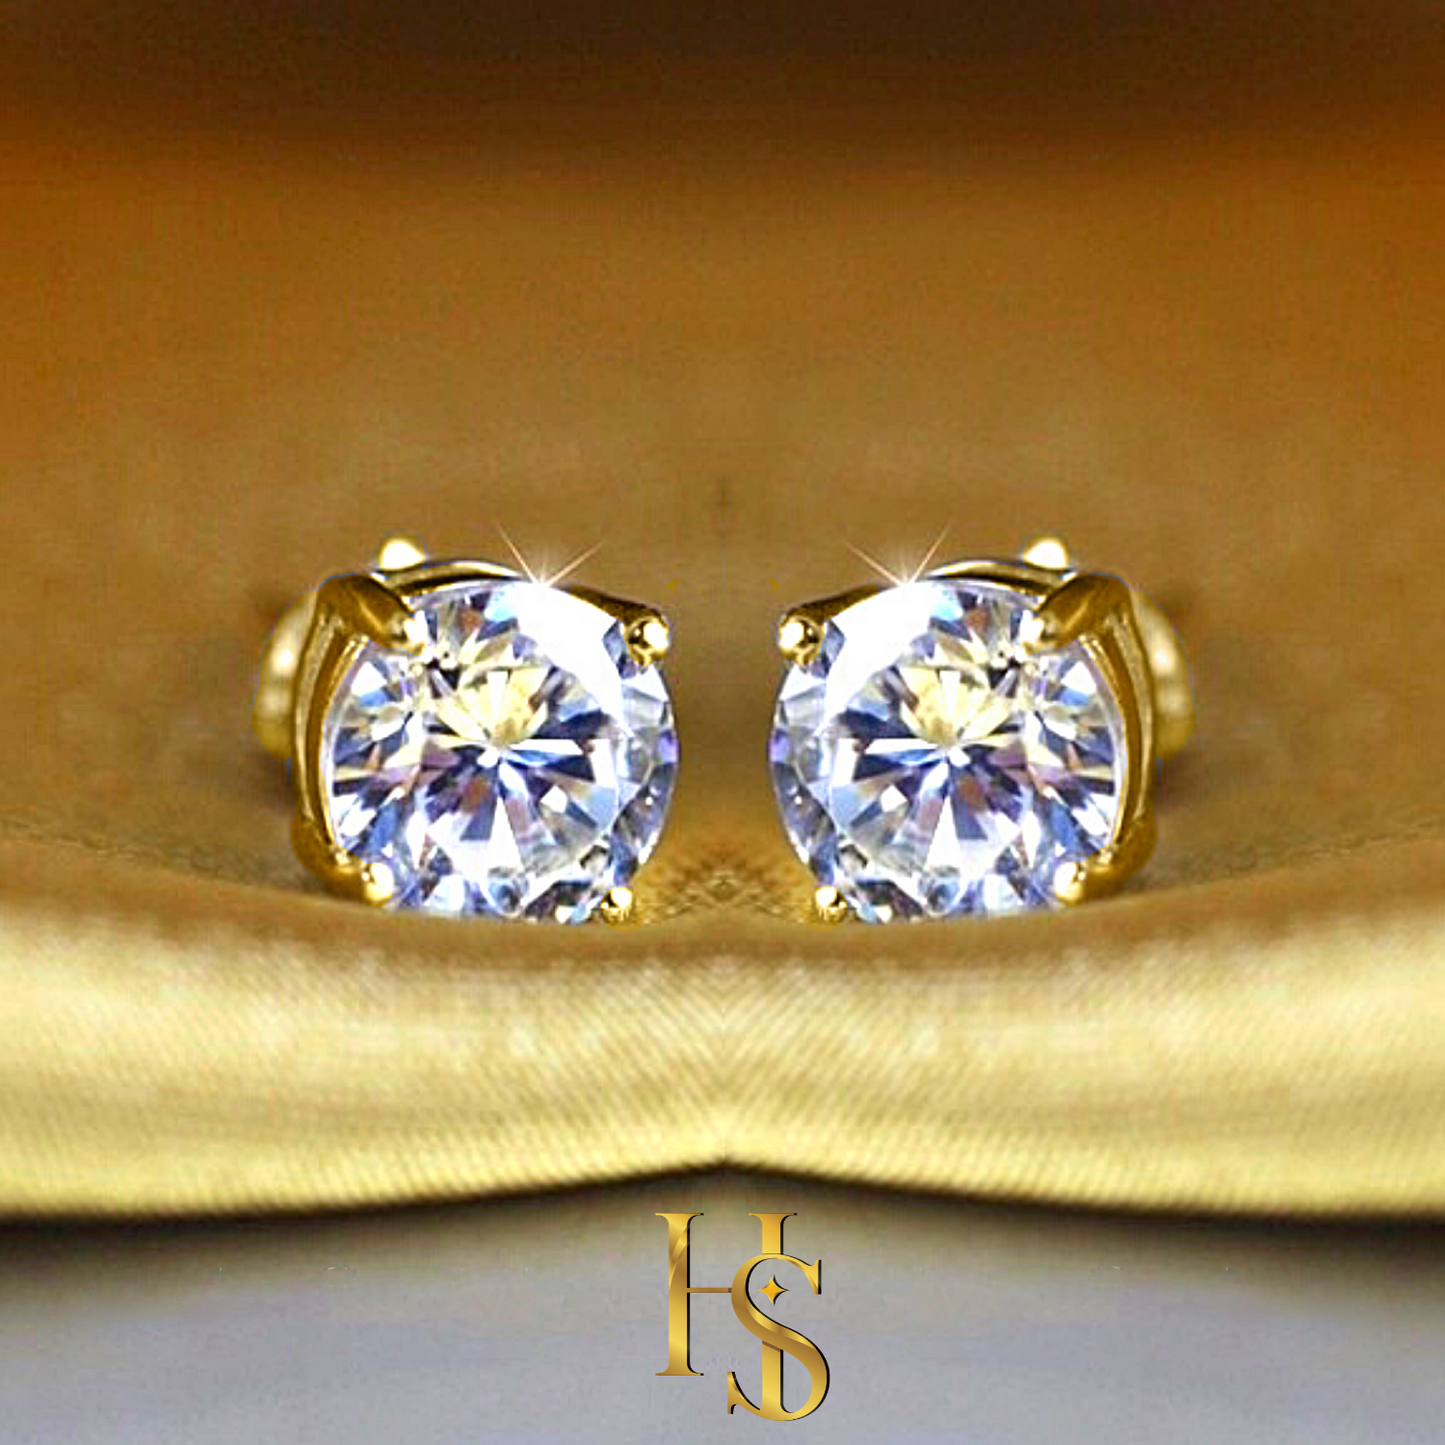 Solitaire Earrings embellished with Swarovski Zirconia - 92.5 Silver in 18K Gold Finish